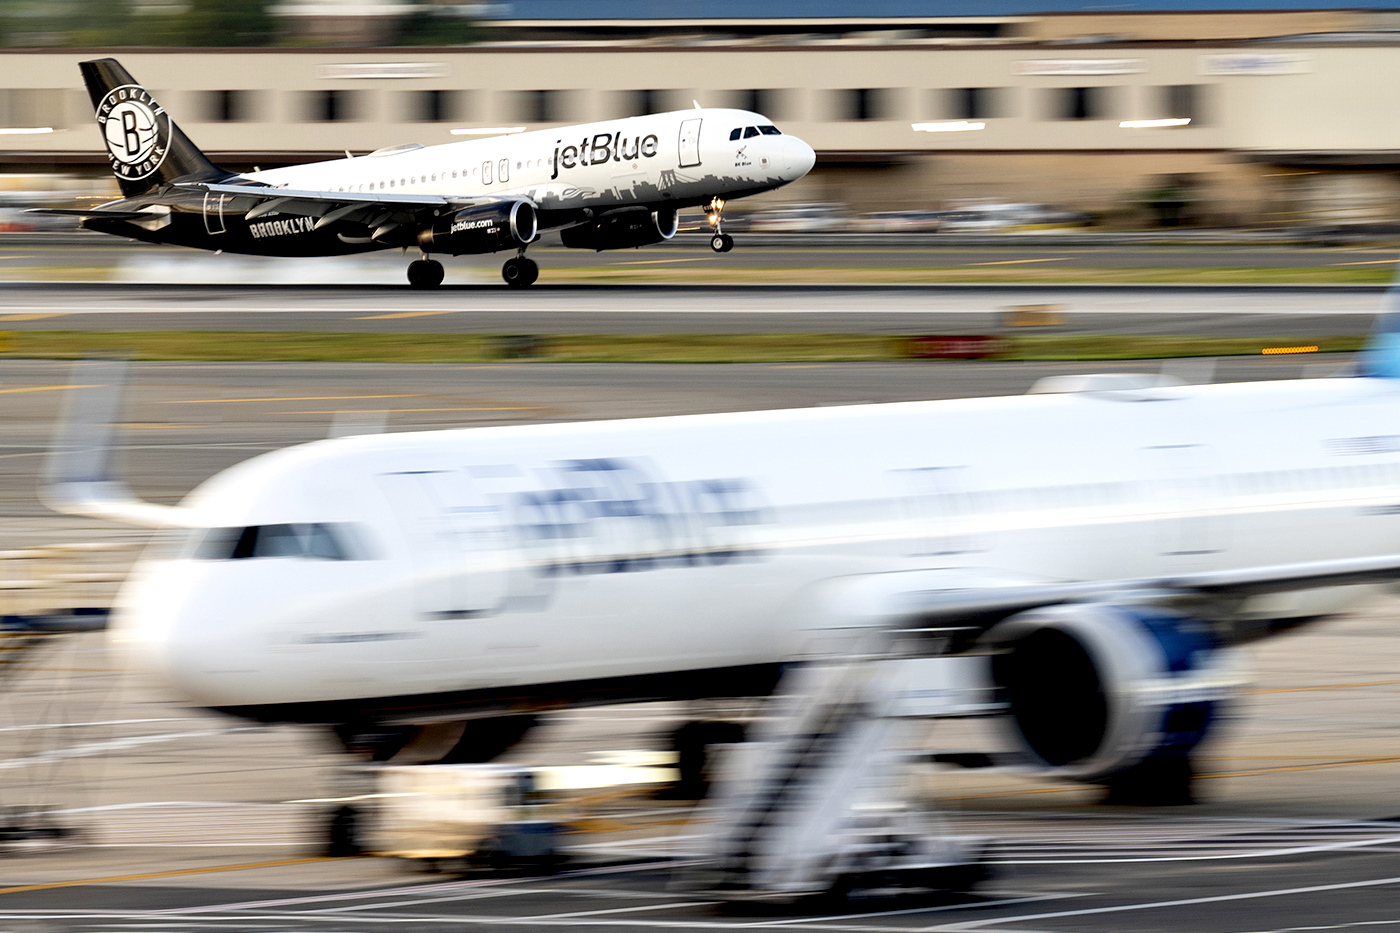 A JetBlue plane takes off from a runway